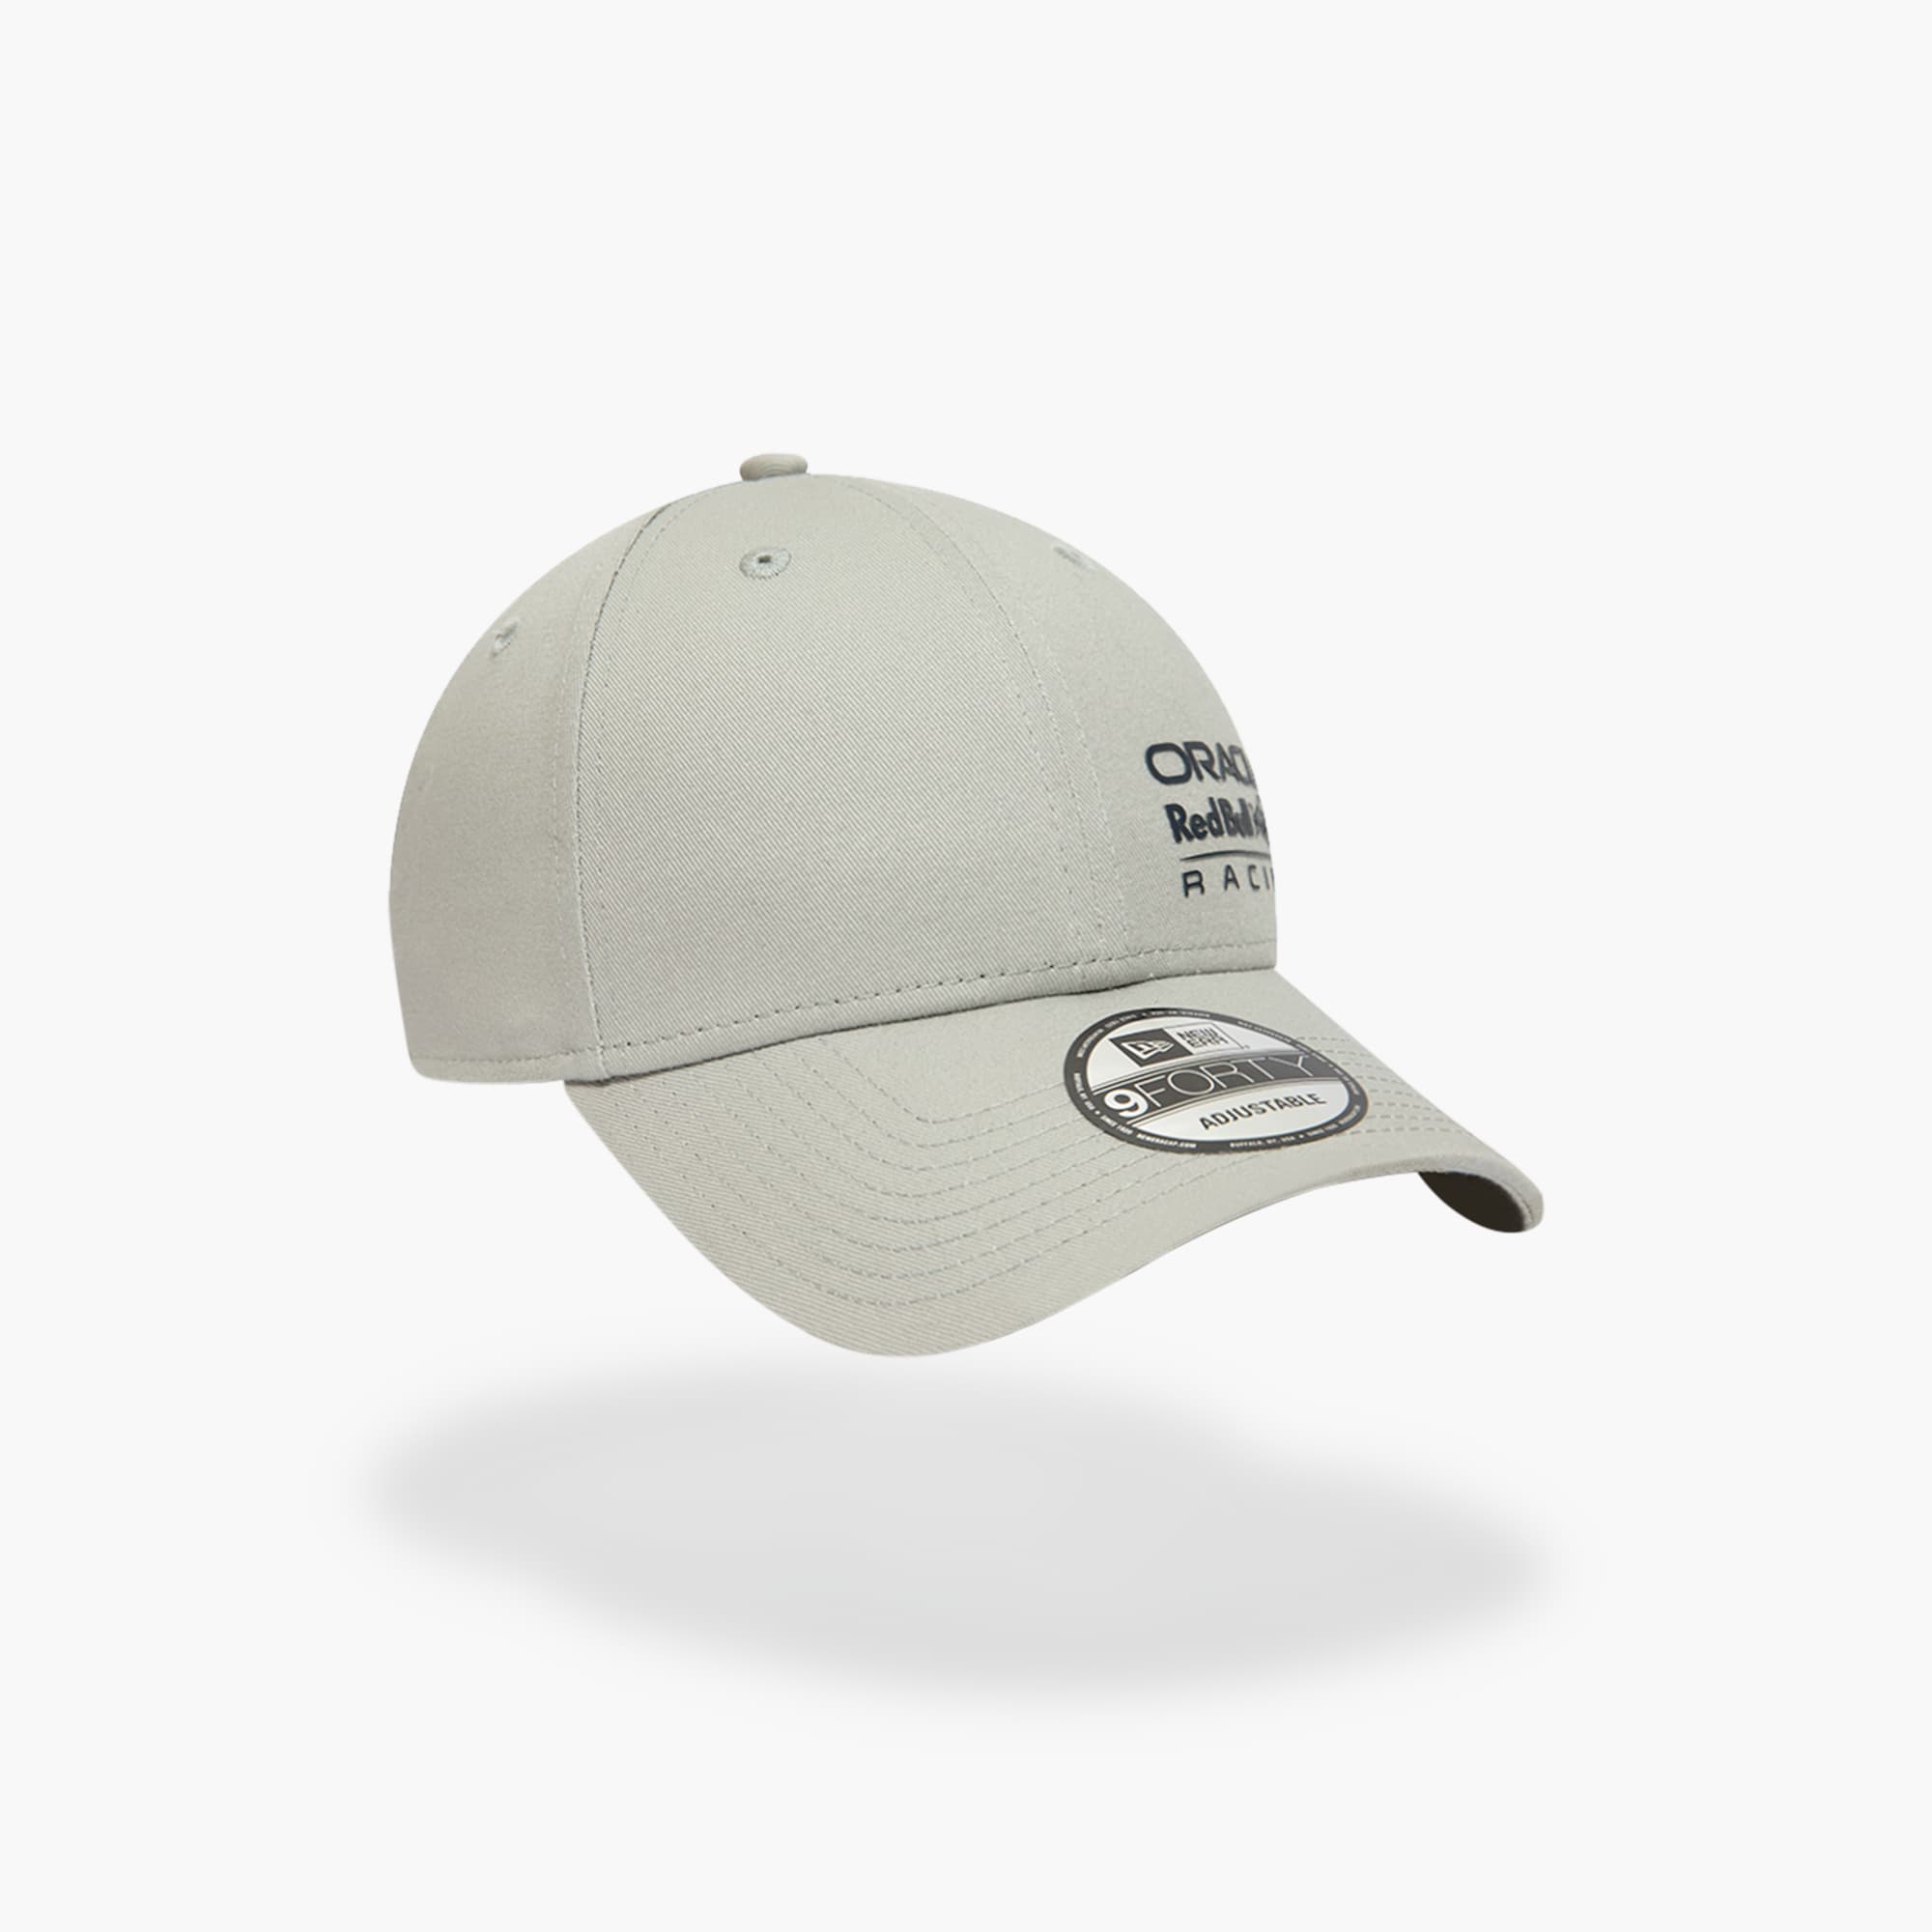 Oracle Red Bull Racing Shop: New Era 9Forty Essential Mono Cap | only ...